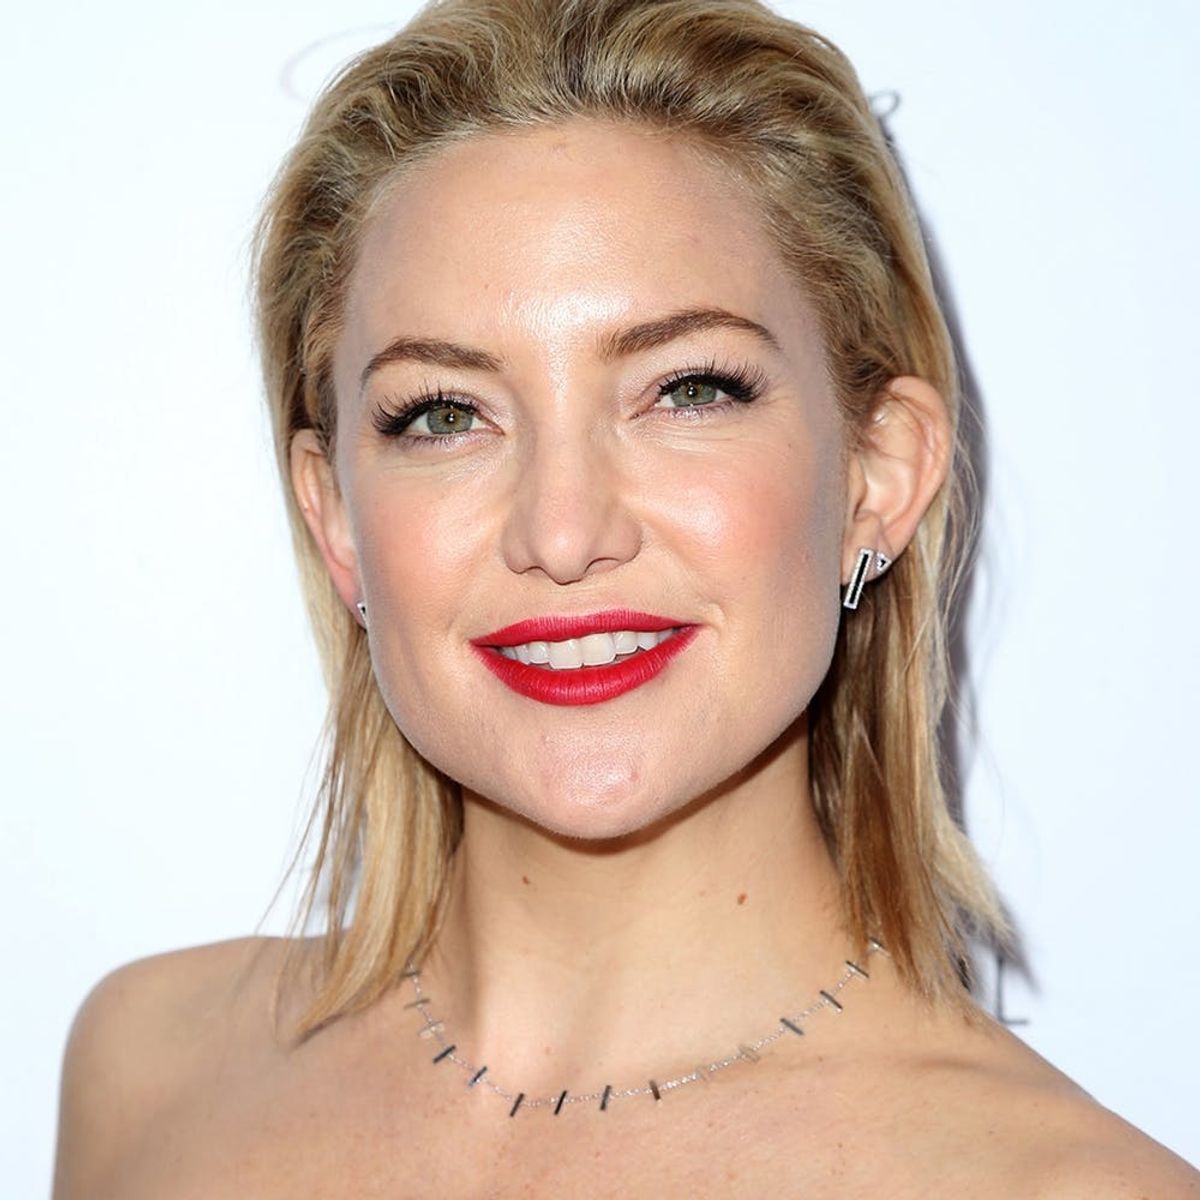 Kate Hudson Just Introduced a Very Unexpected Skiing Accessory